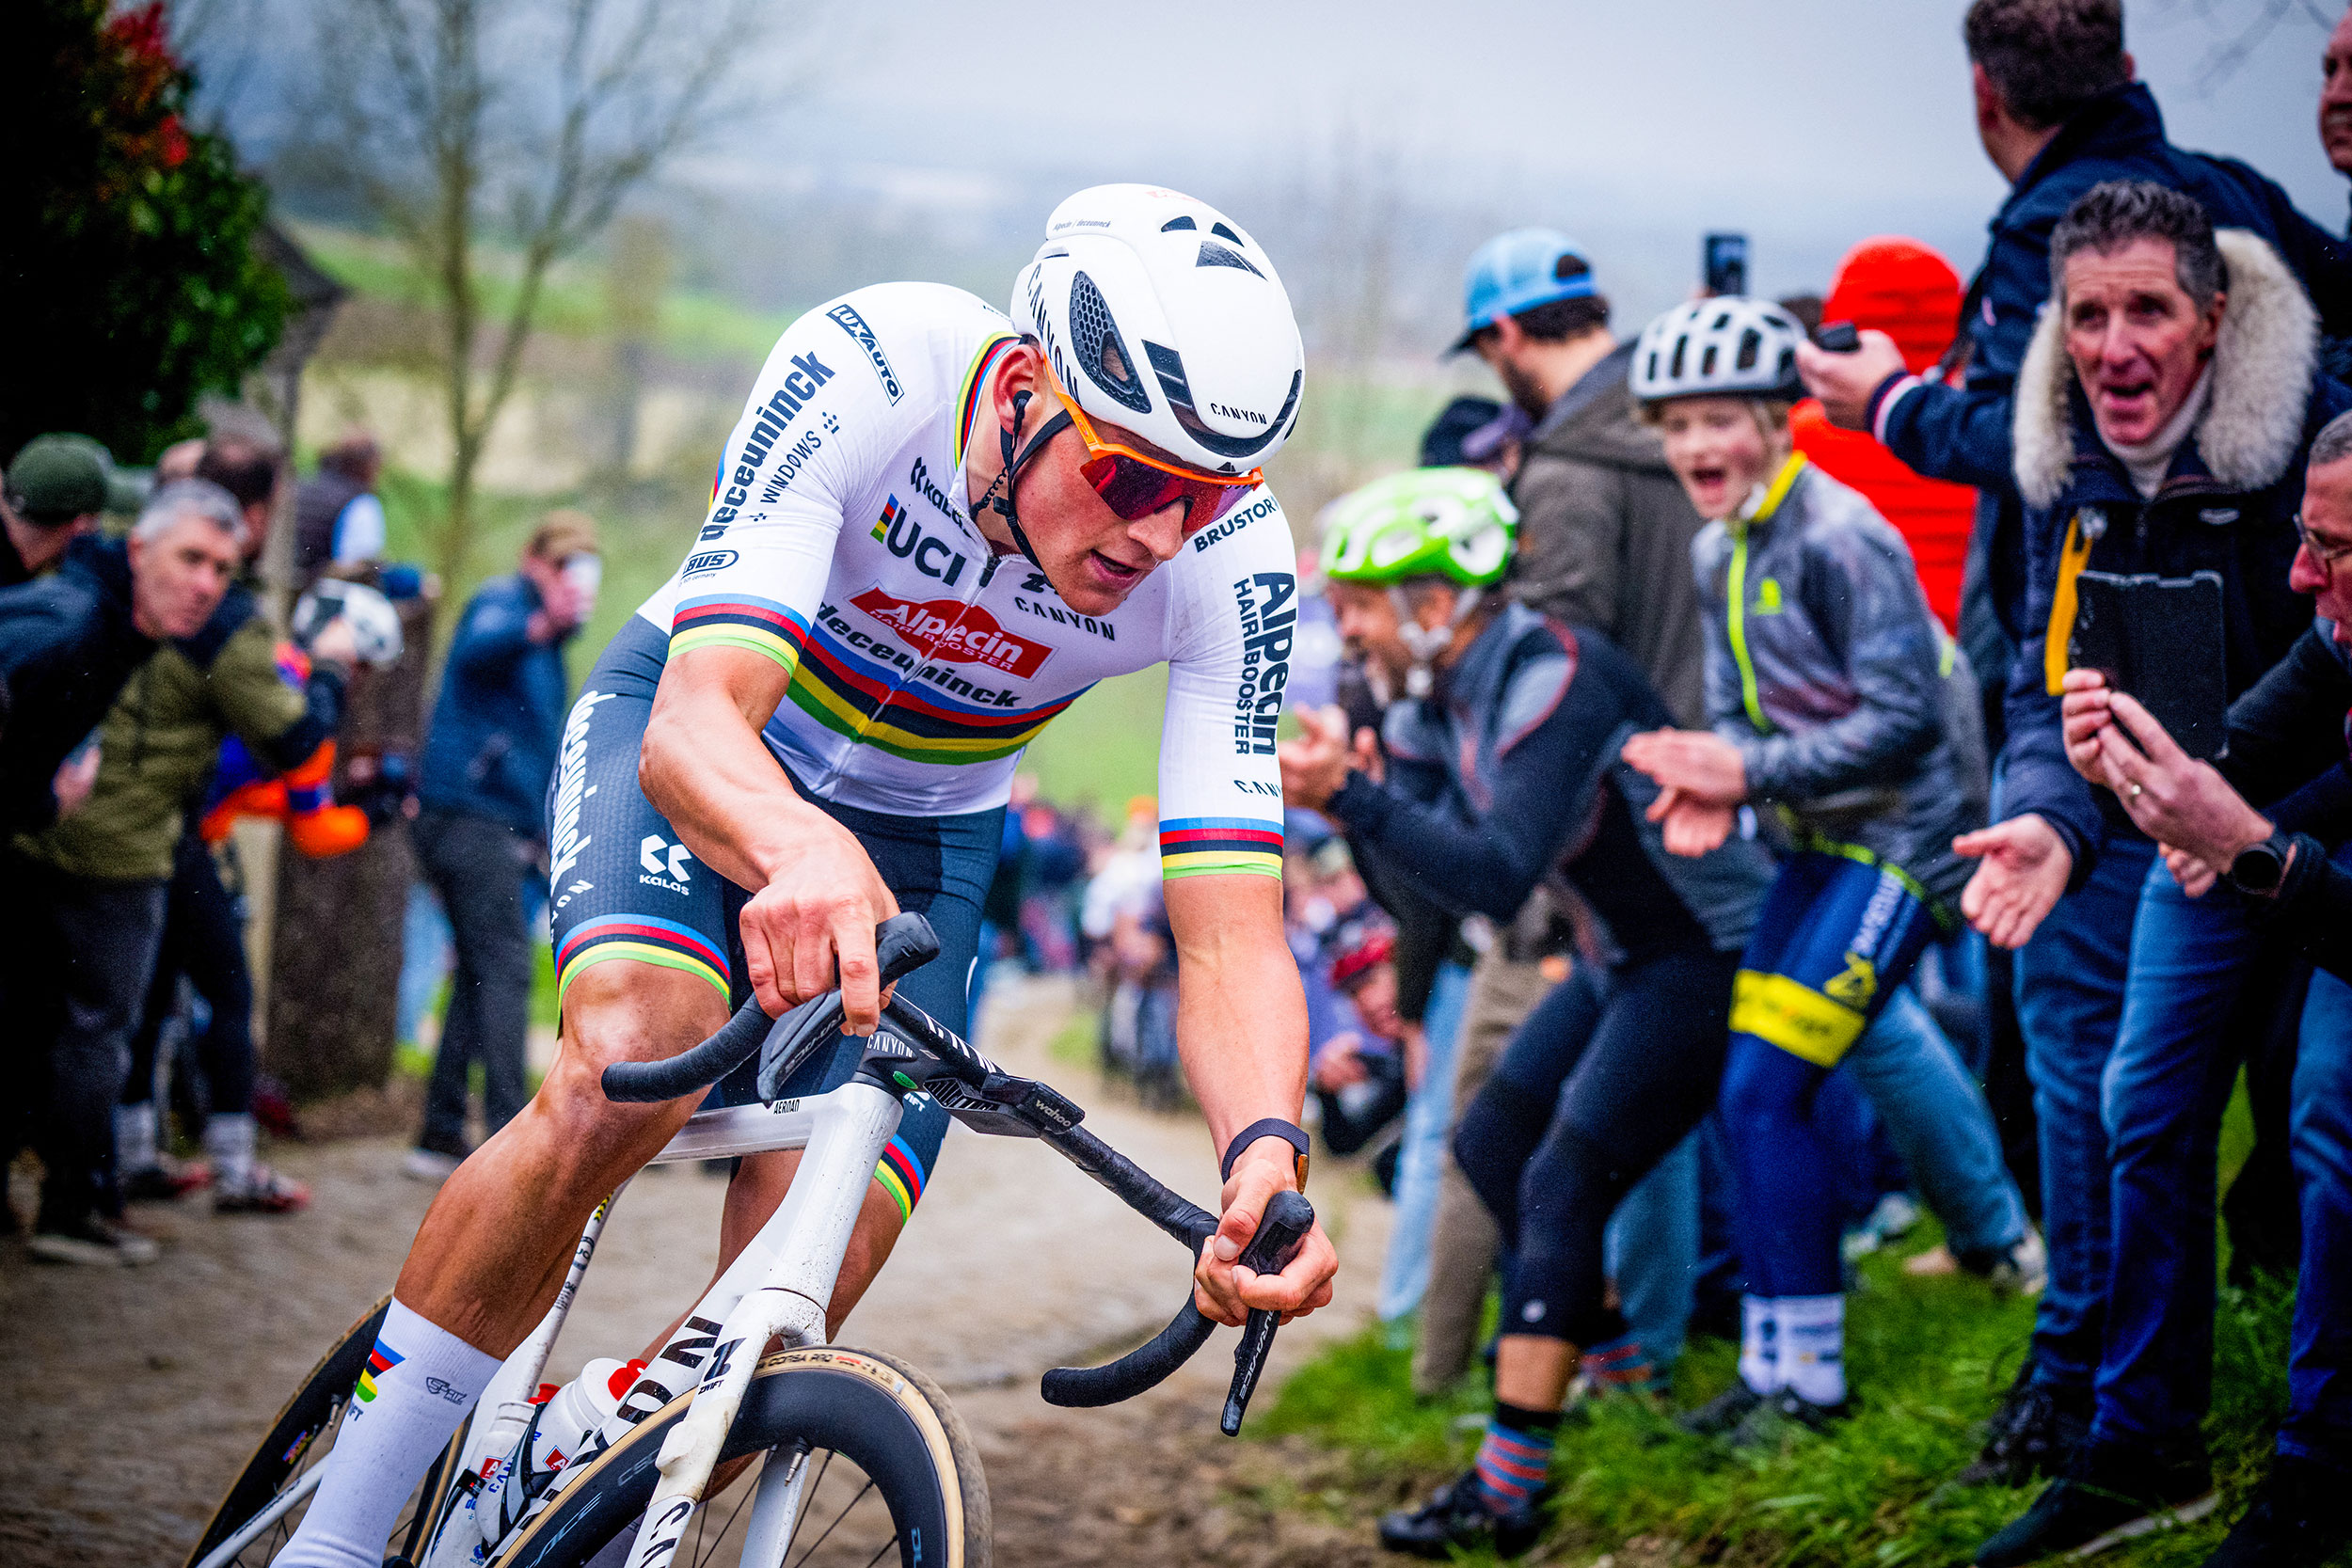 Mathieu van der Poel is on his way to his dominant win at the E3 Saxo Classic